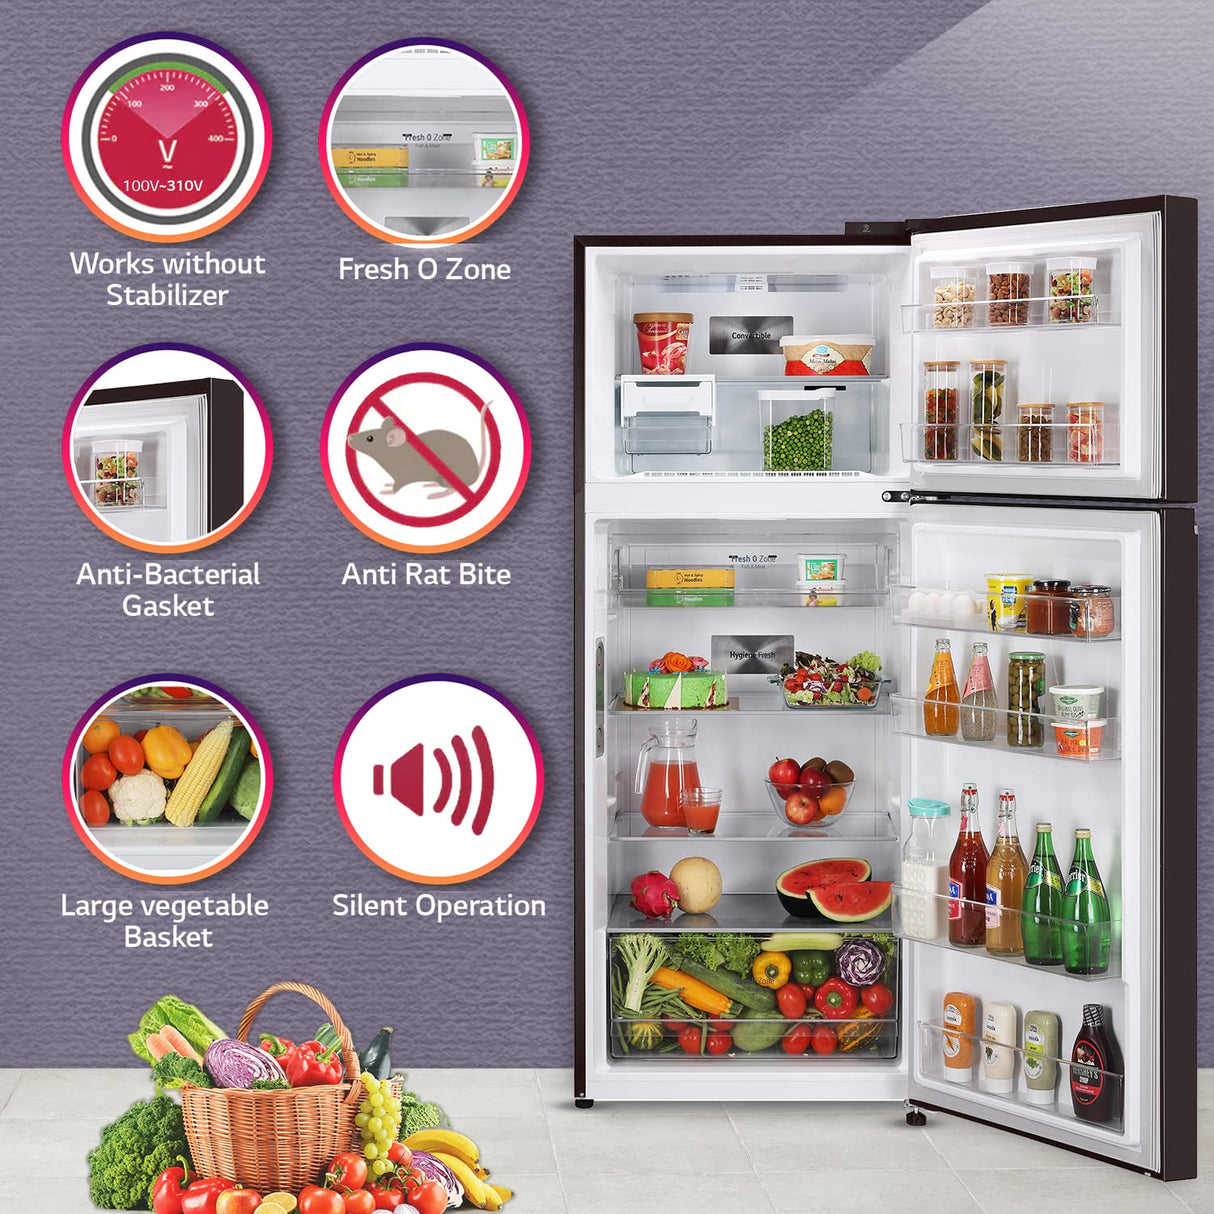 LG Double Door Fridge: 423L, 3 Star, Wi-Fi Enabled - Smart and Efficient